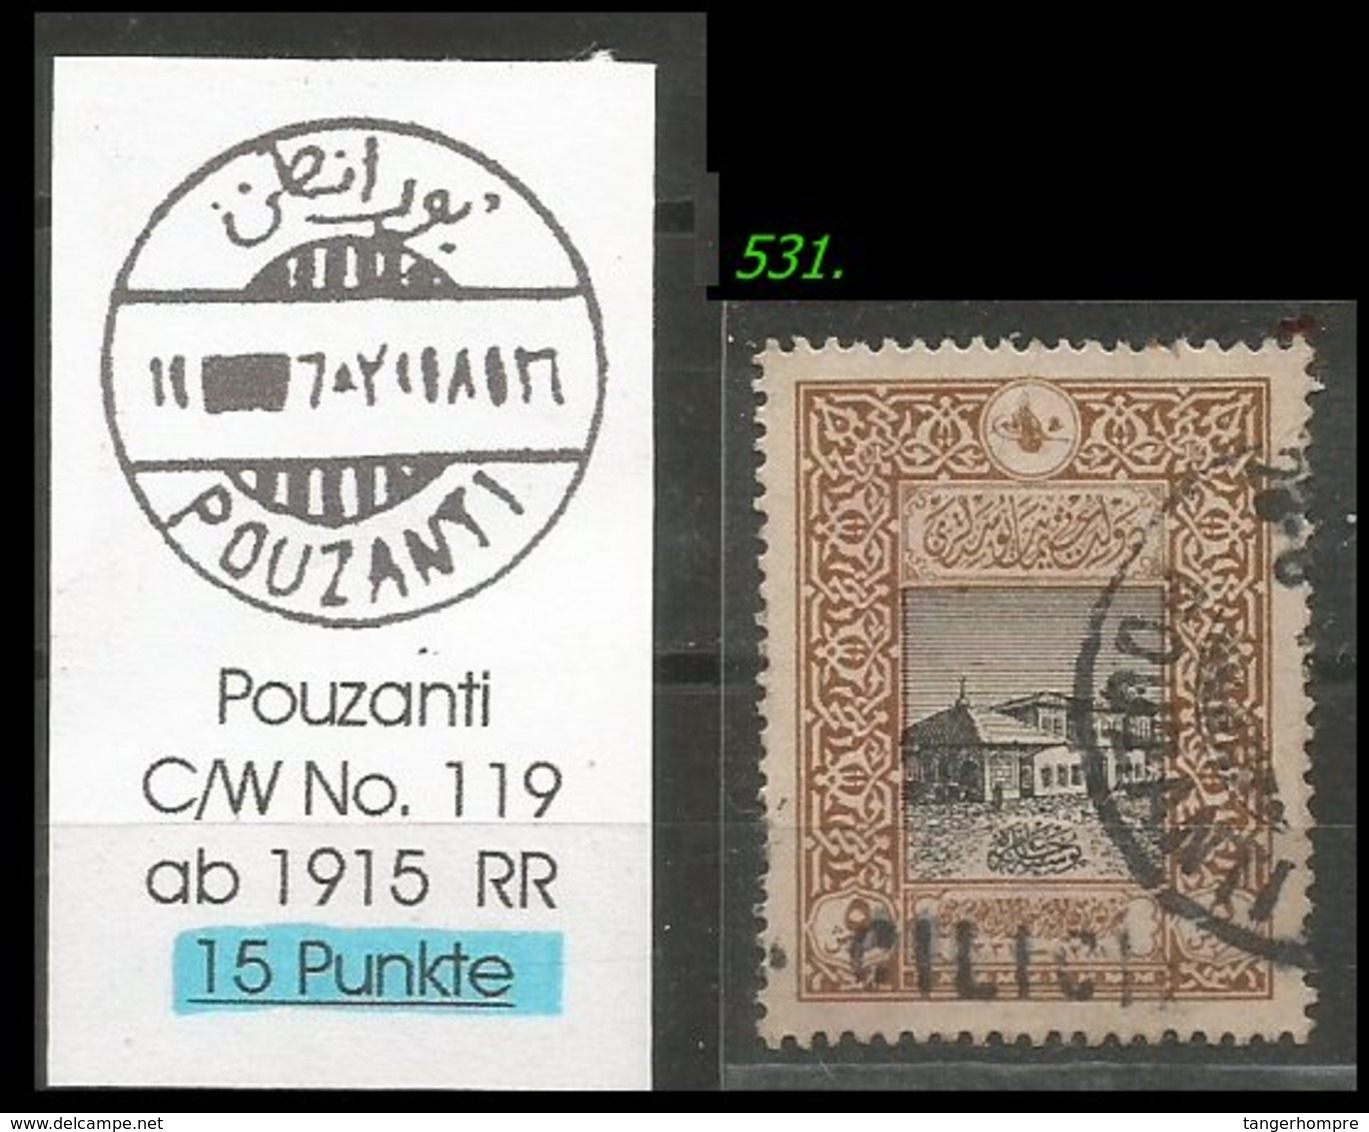 EARLY OTTOMAN SPECIALIZED FOR SPECIALIST, SEE...POUZANTI -RR- - Used Stamps